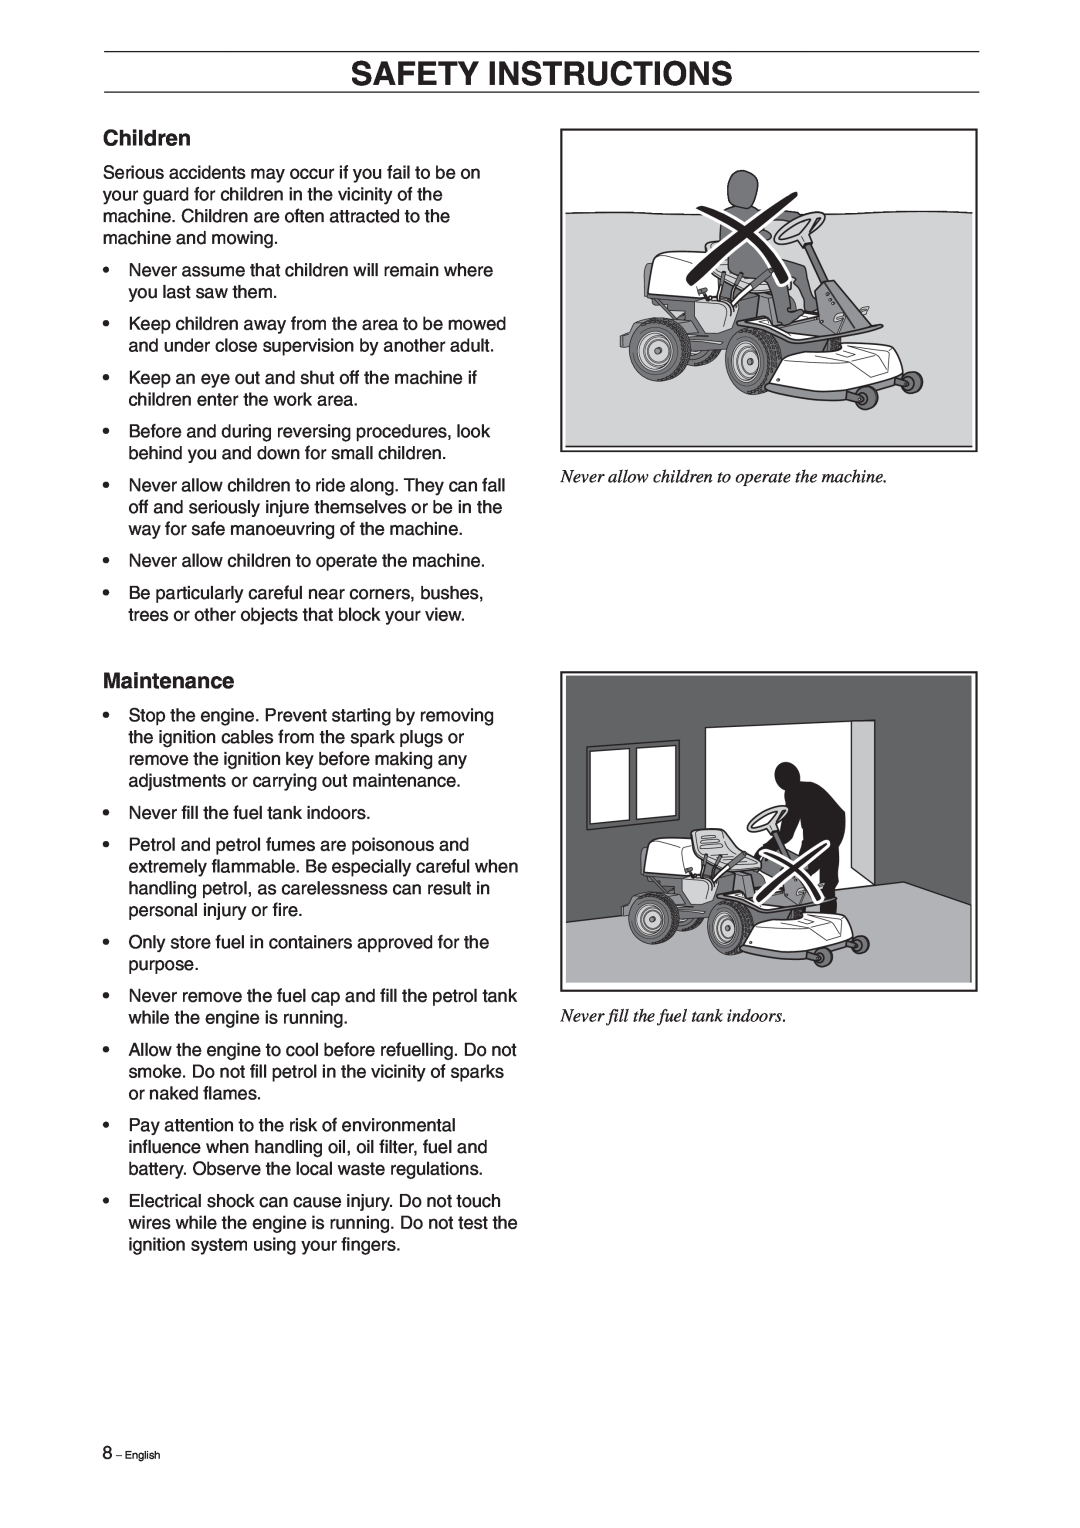 Husqvarna 15V2 manual Children, Maintenance, Never allow children to operate the machine, Never fill the fuel tank indoors 